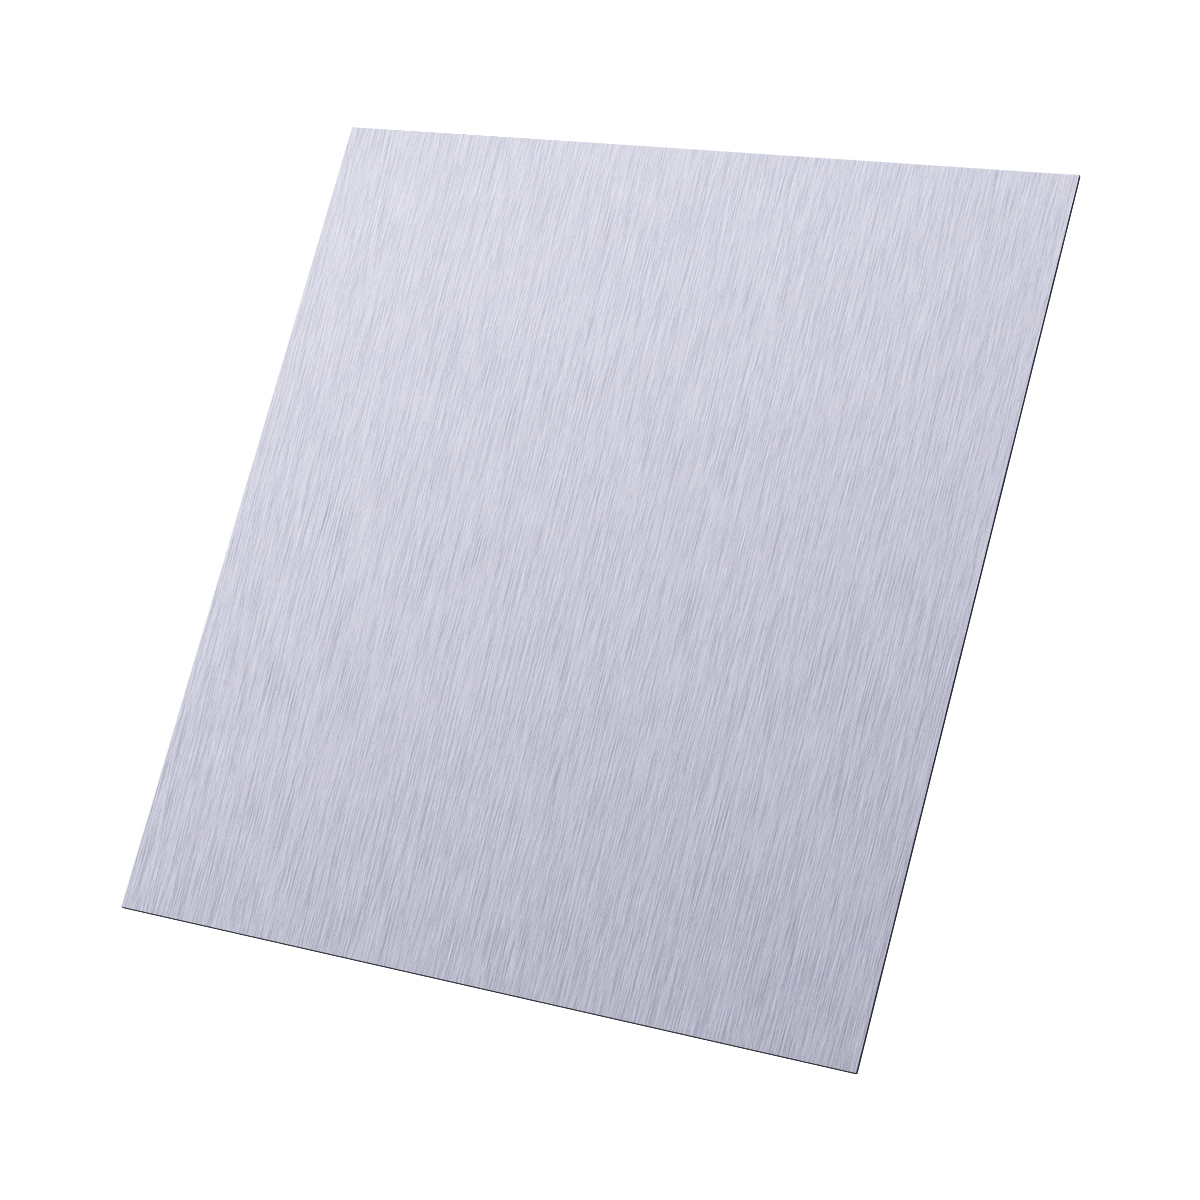 1pc Pure Zinc Zn Sheet Plate Durable Metal Foil For Science 100x100x0.5mm Mayitr